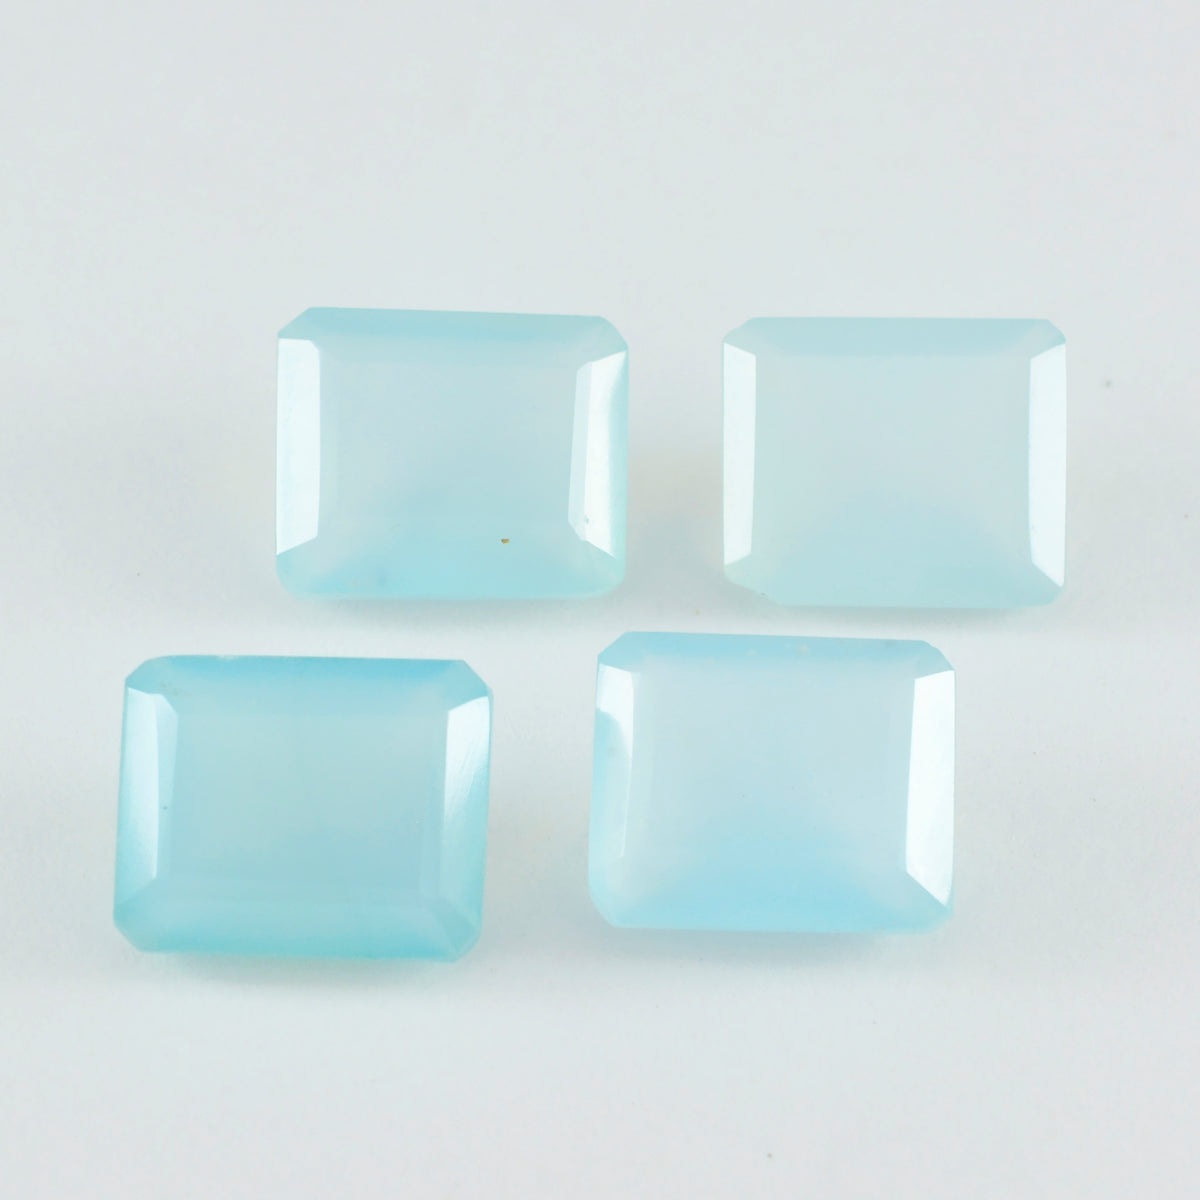 Riyogems 1PC Genuine Aqua Chalcedony Faceted 10x14 mm Octagon Shape excellent Quality Loose Stone